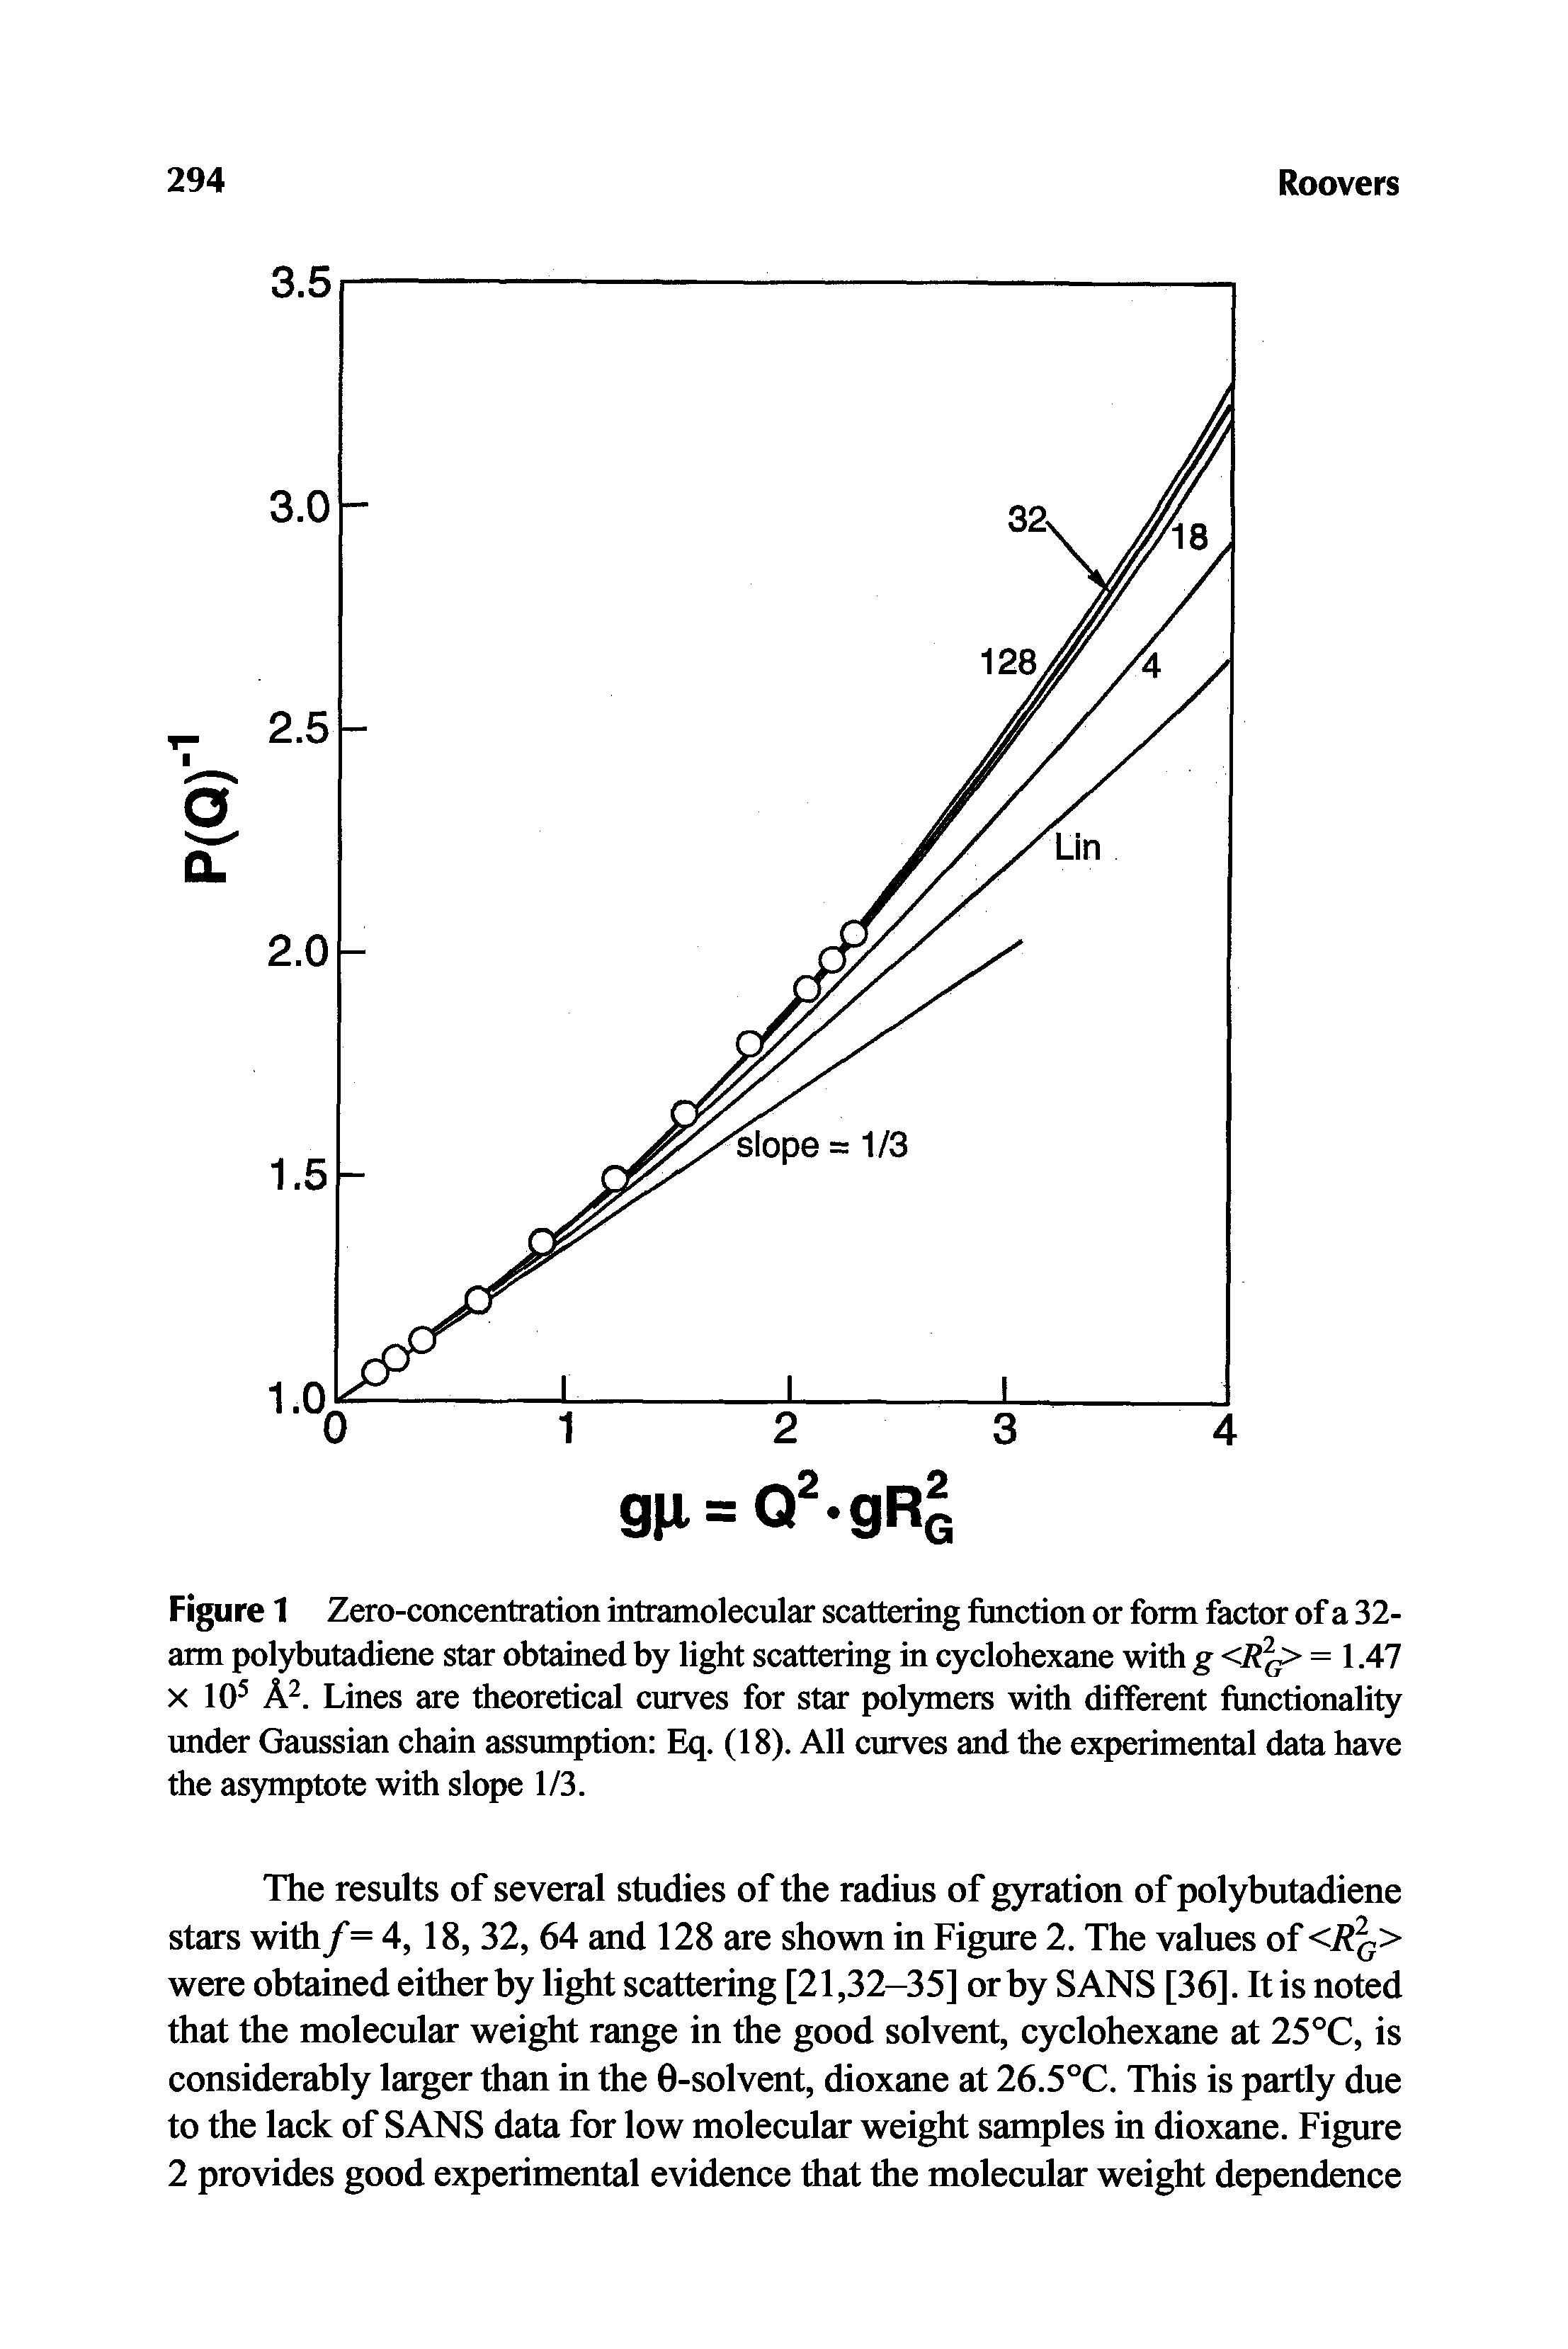 Figure 1 Zero-concentration intramolecular scattering function or form factor of a 32-arm polybutadiene star obtained by light scattering in cyclohexane with g <R = 1.47 X 10 A. Lines are theoretical curves for star polymers with different functionality under Gaussian chain assumption Eq. (18). All curves and the experimental data have the asymptote with slope 1/3.